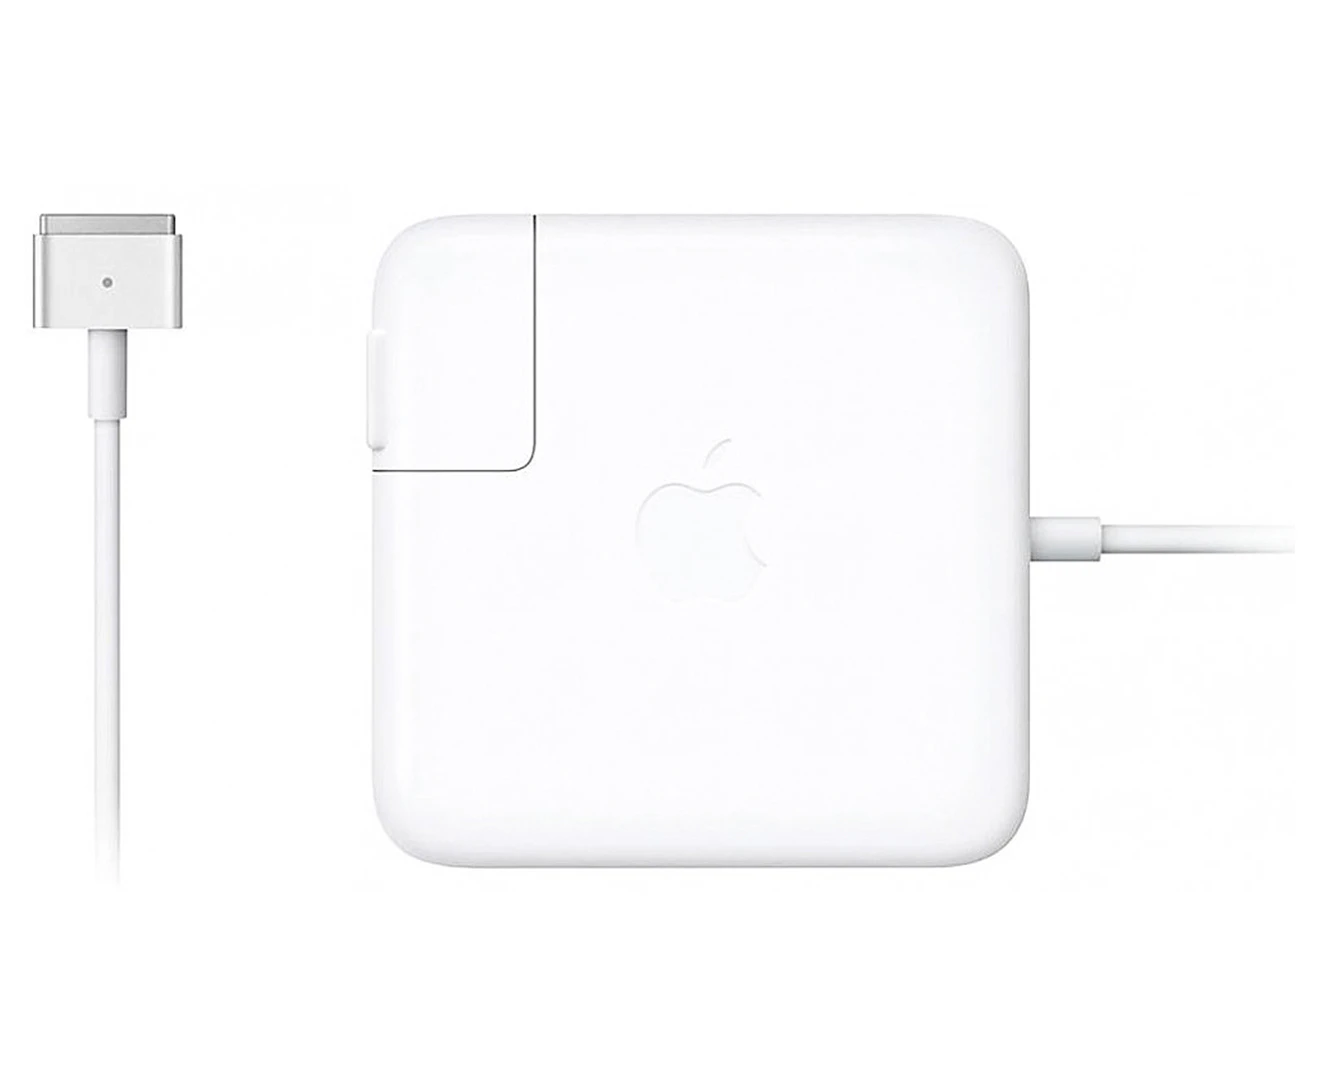 Apple 60W MagSafe 2 Power Adapter for 13-inch MacBook Pro with Retina  Display (2012-2015)